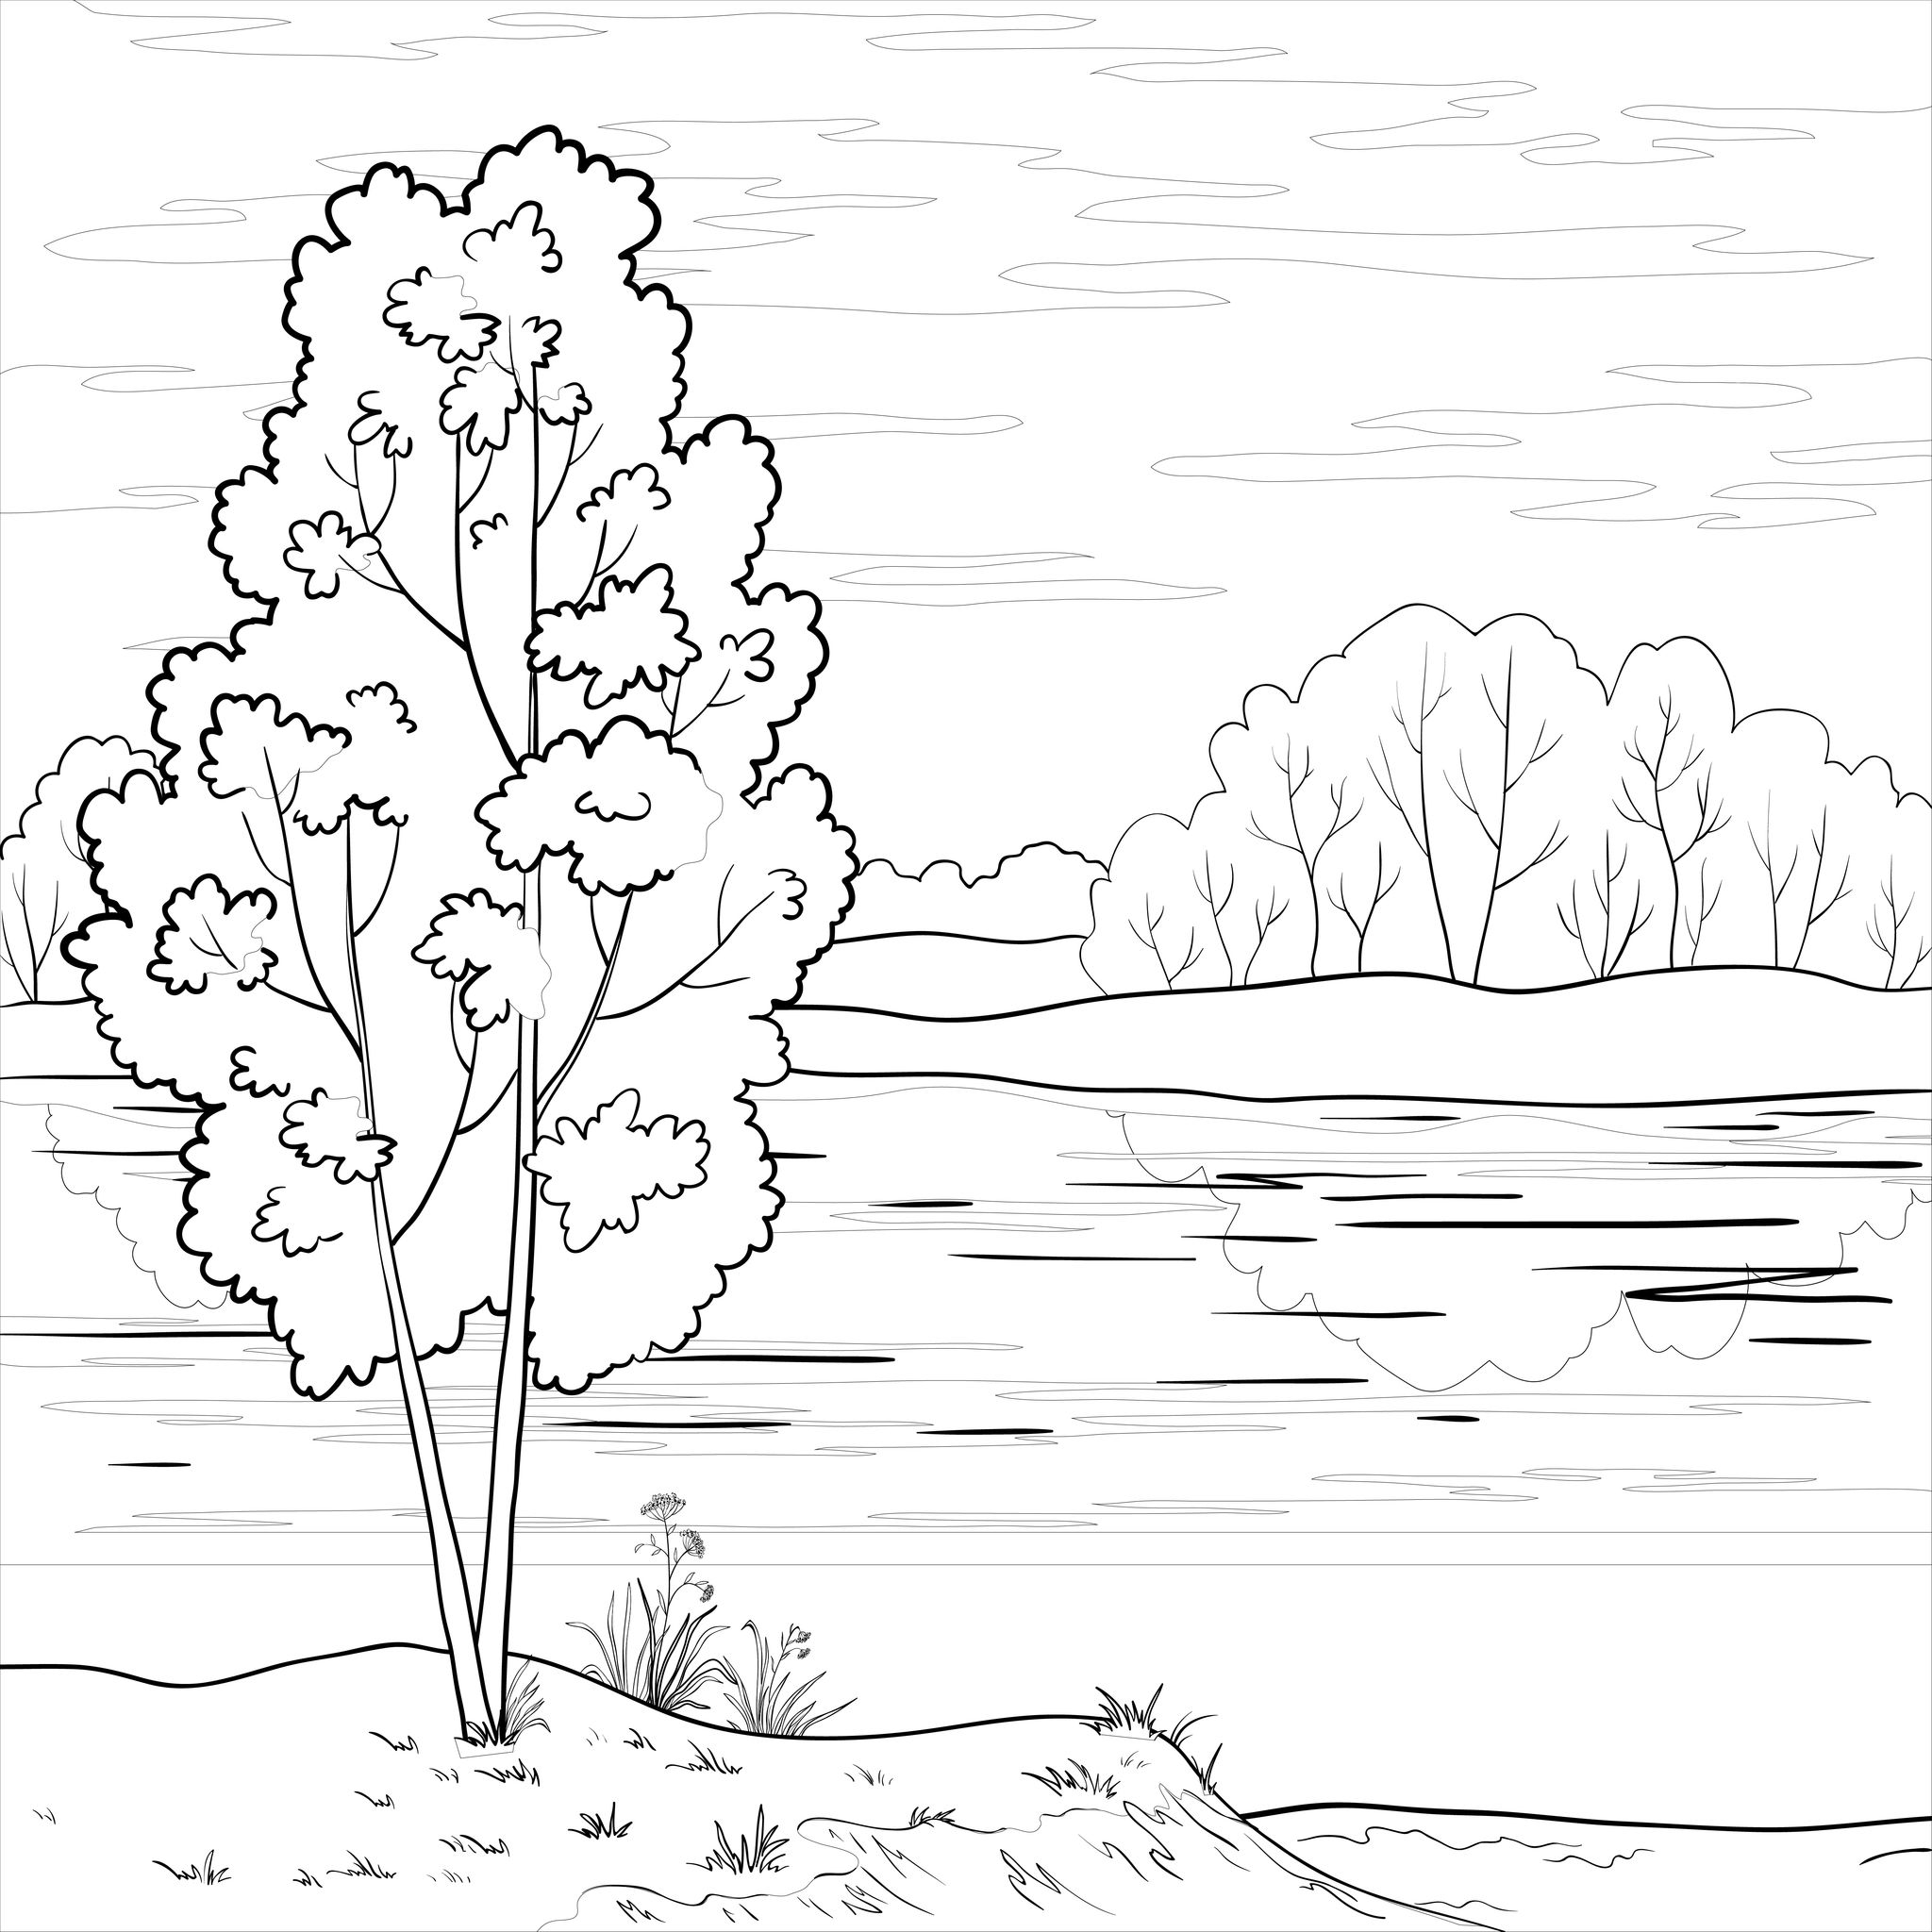 Coloring page: River (Nature) #159269 - Free Printable Coloring Pages